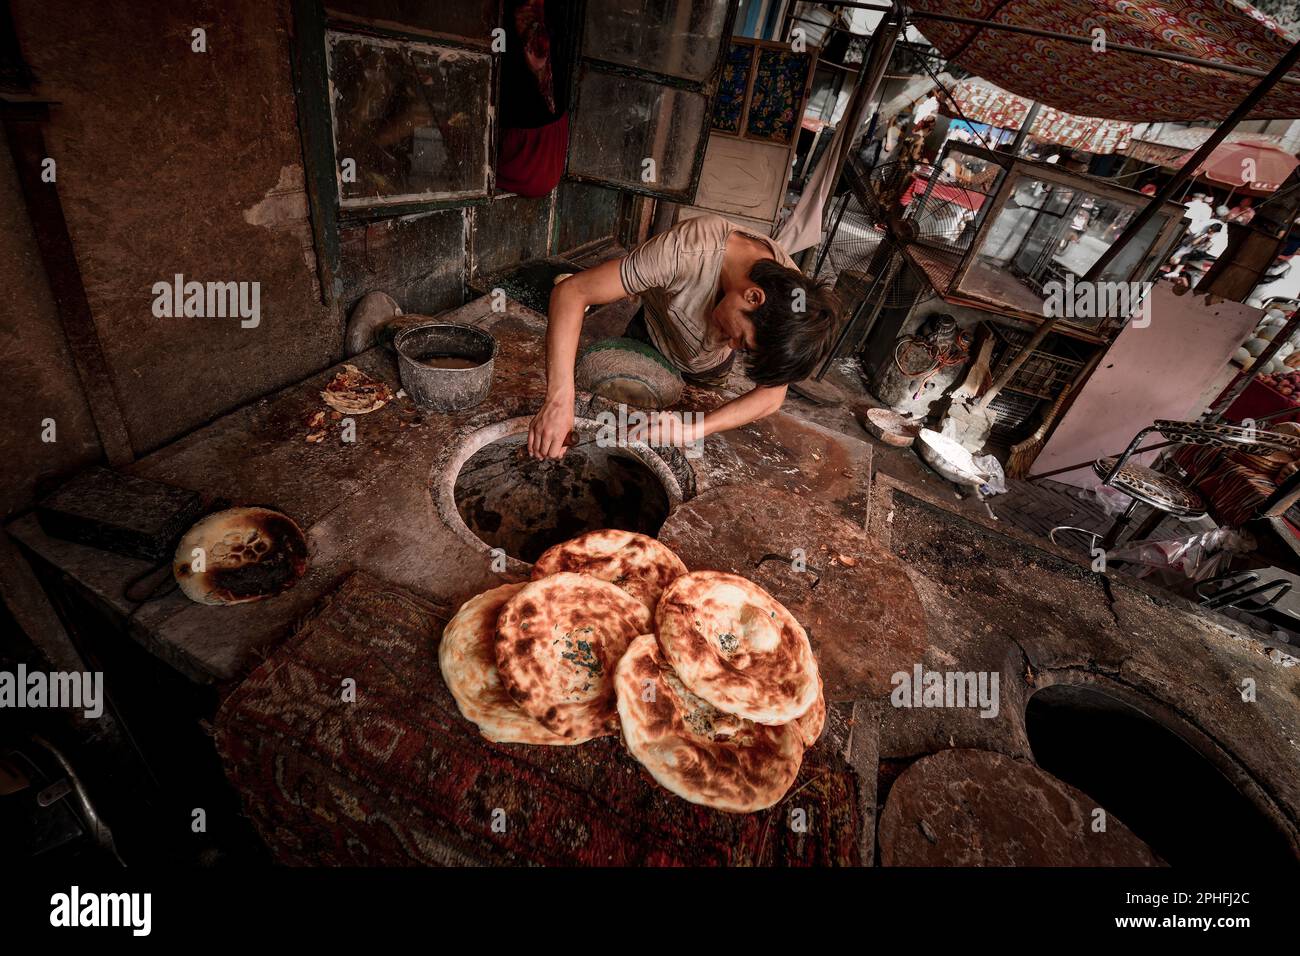 An old vendor selling baked naan on the old street of Kashgar, the cakes are full of fragrance Stock Photo